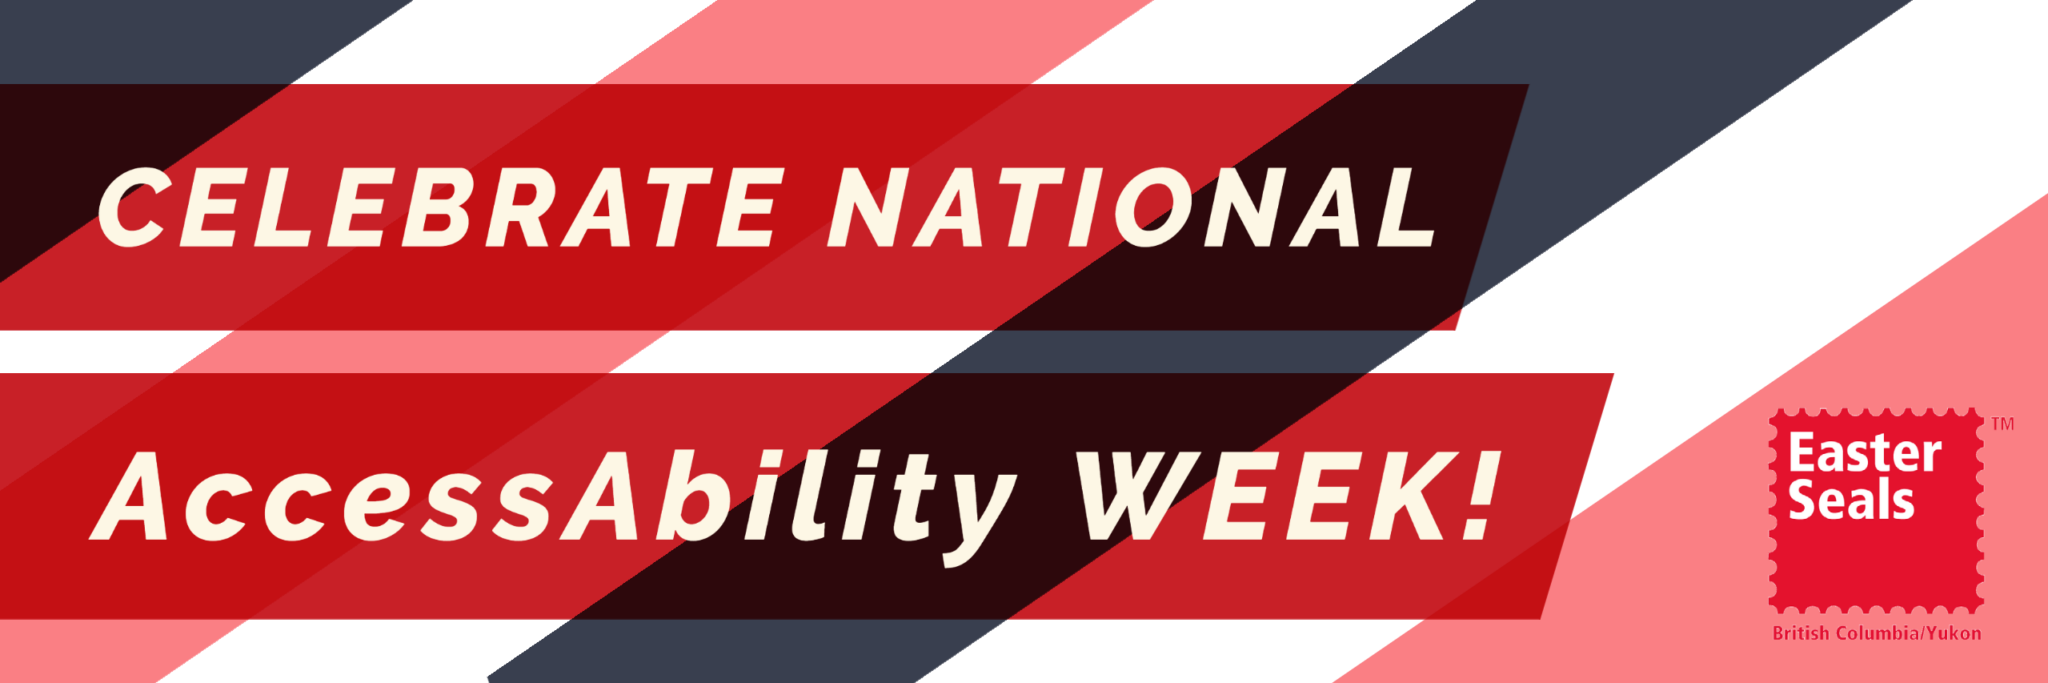 Resources for National Accessibility Week Easter Seals BC and Yukon